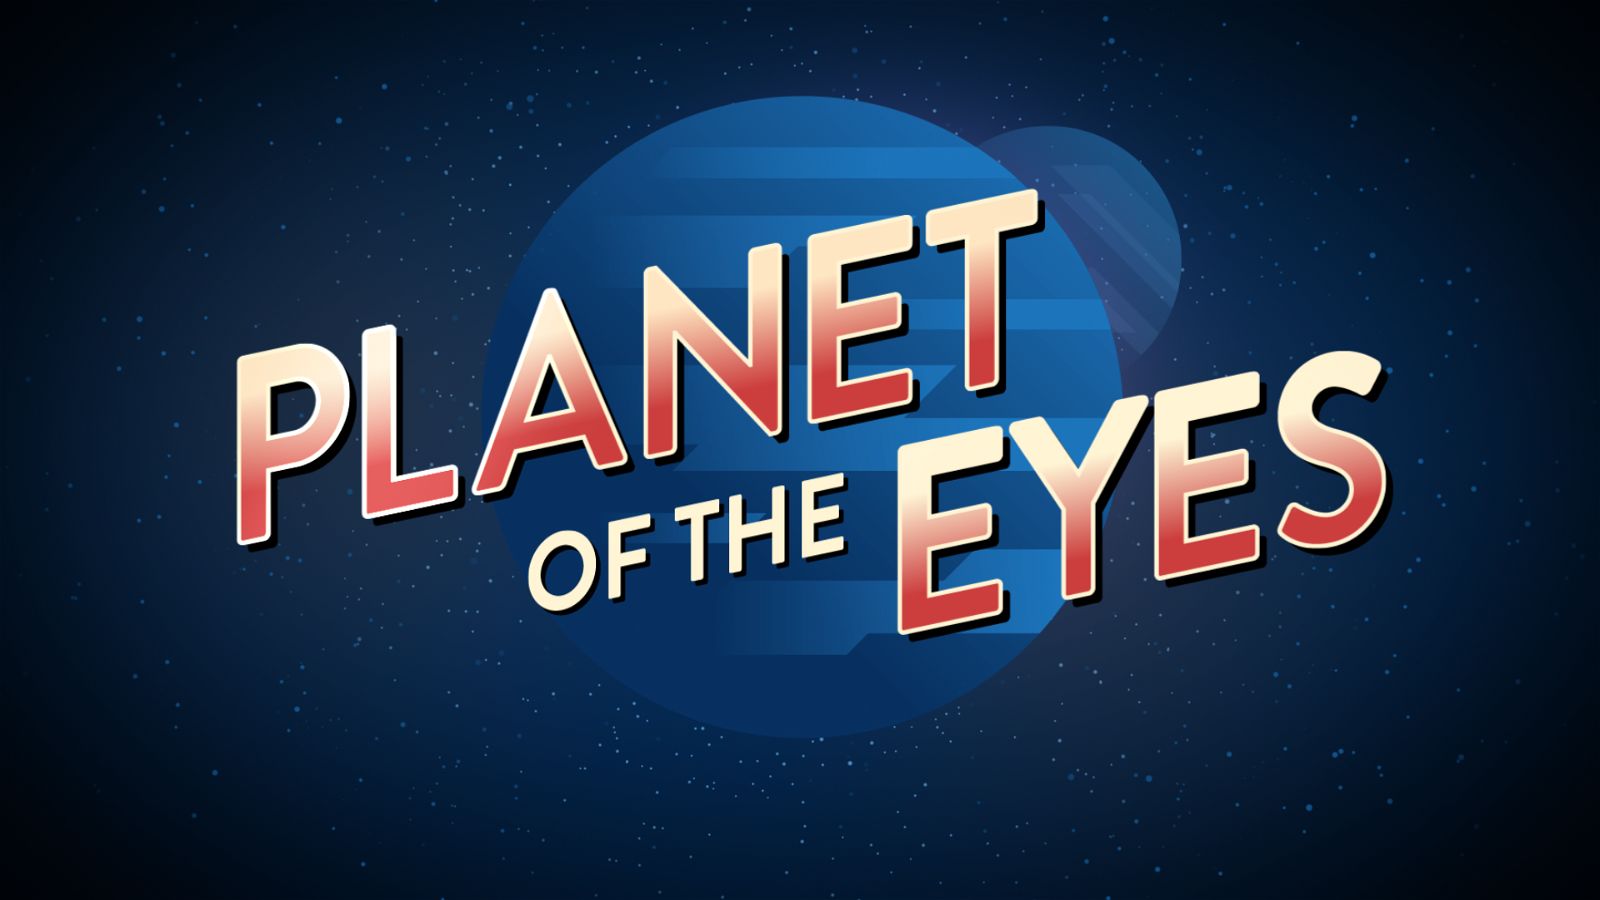 Image of Planet of the Eyes